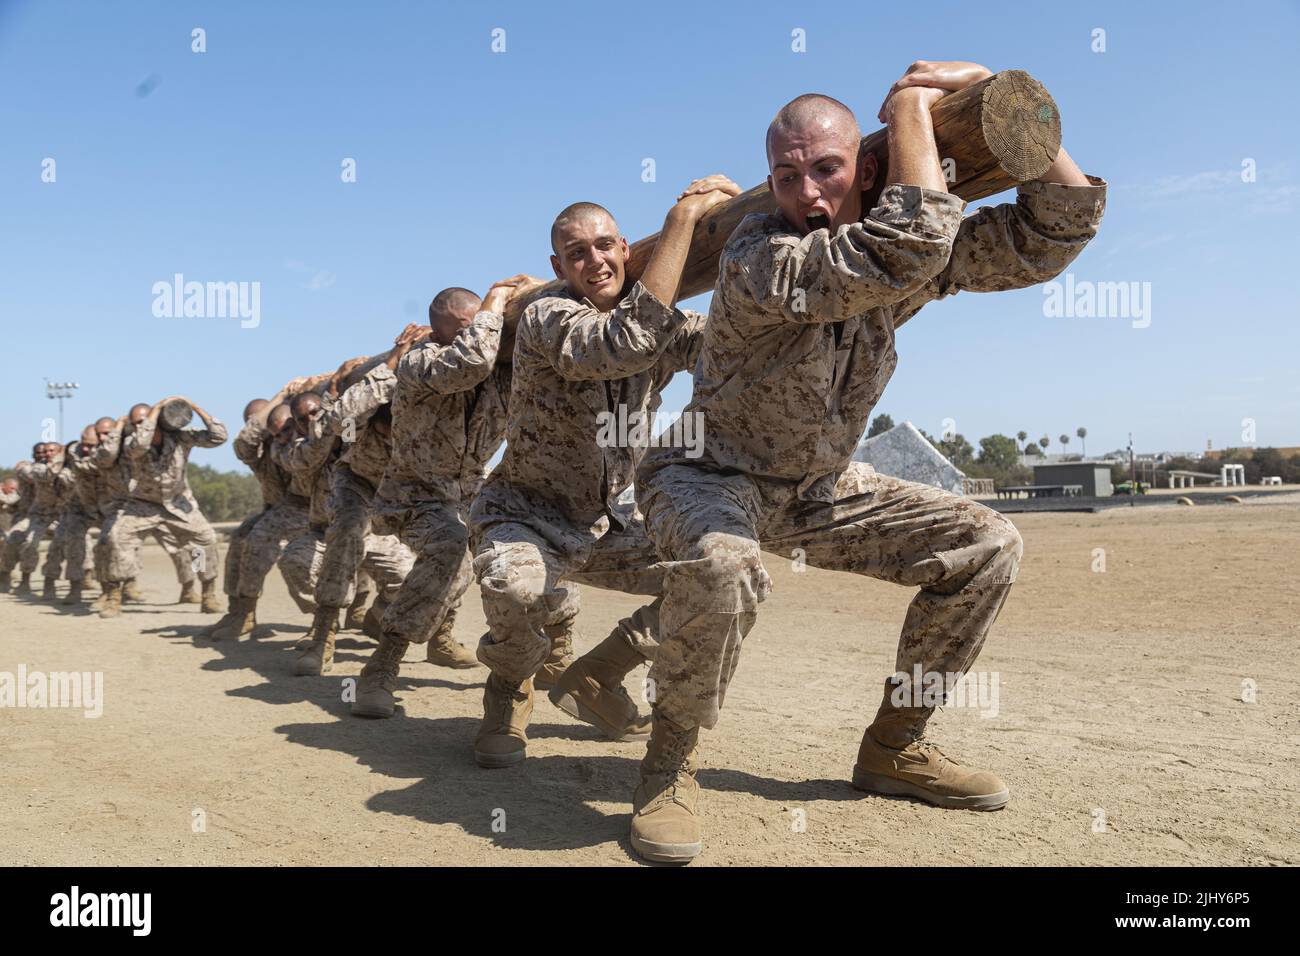 San Diego, United States. 18 July, 2022. U.S. Marines recruits with Golf Company, 2nd Recruit Training Battalion, squat as a team during log drills with a a 250 pound tree log during basic training at Marine Corps Recruit Depot San Diego, July 18, 2022 in San Diego, California.  Credit: Cpl. Tyler W. Abbott/U.S. Marines/Alamy Live News Stock Photo